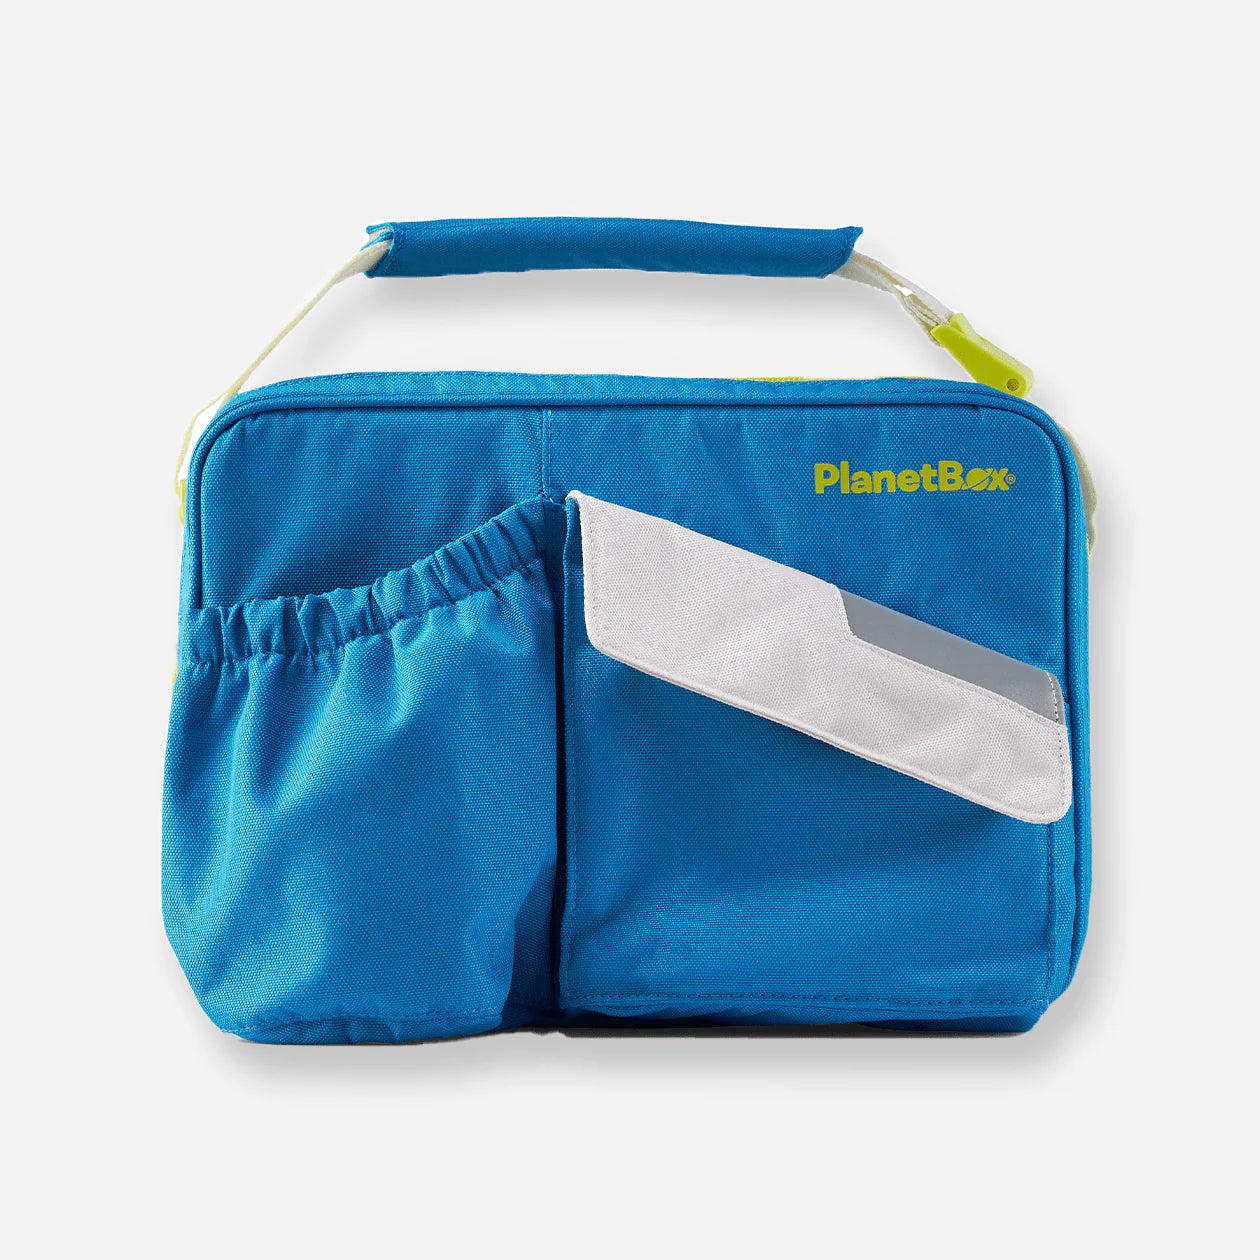 PlanetBox - Carry Bag